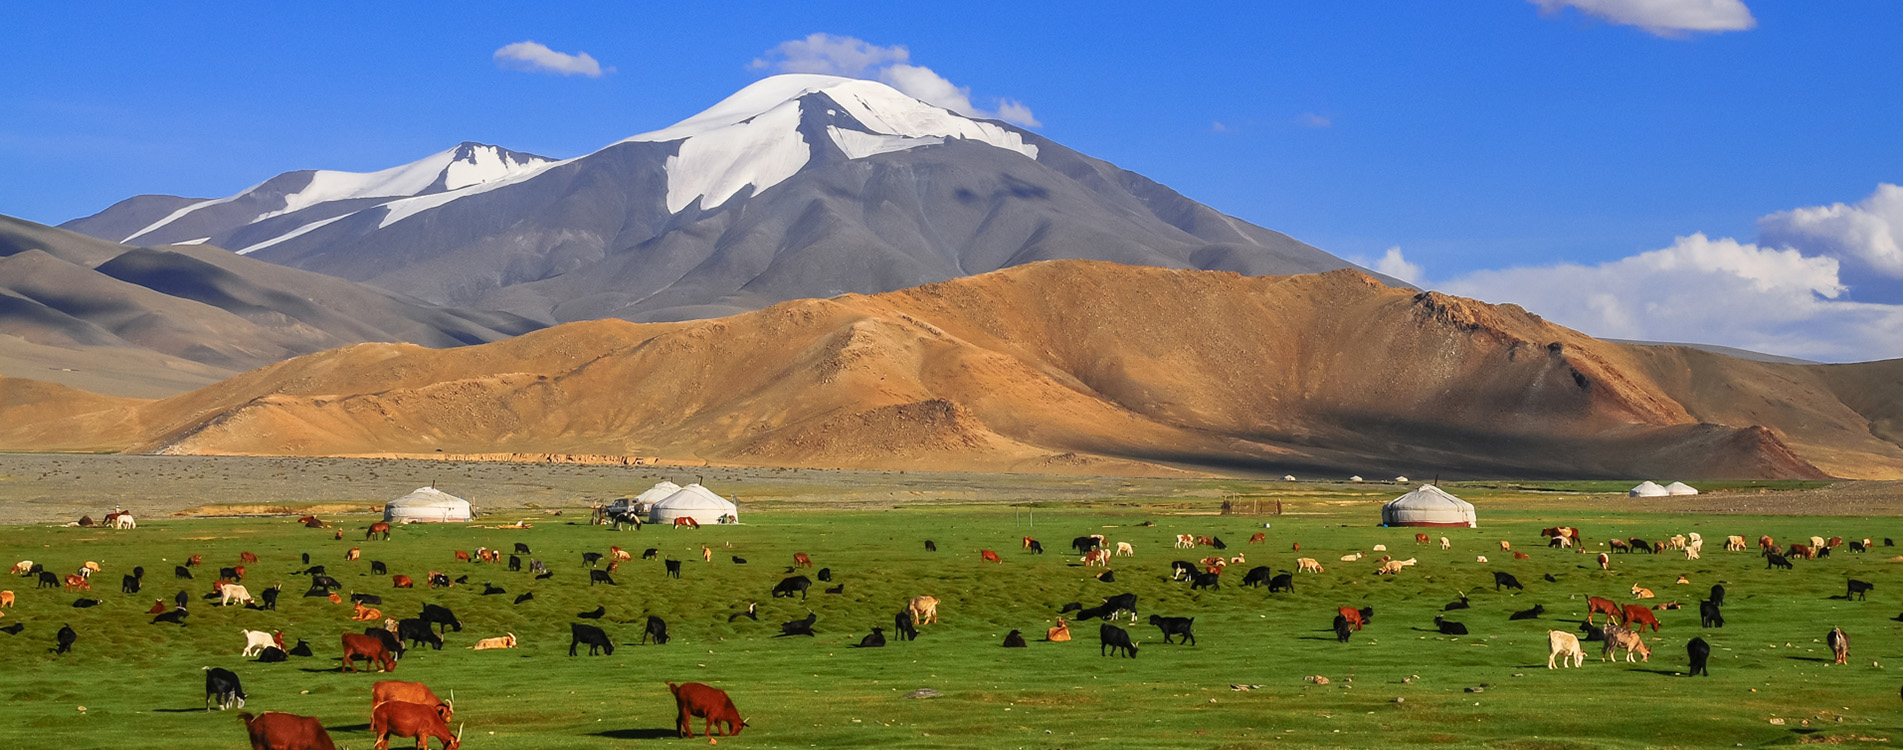 Fun Activities for Your Kids on Their Trip to Mongolia